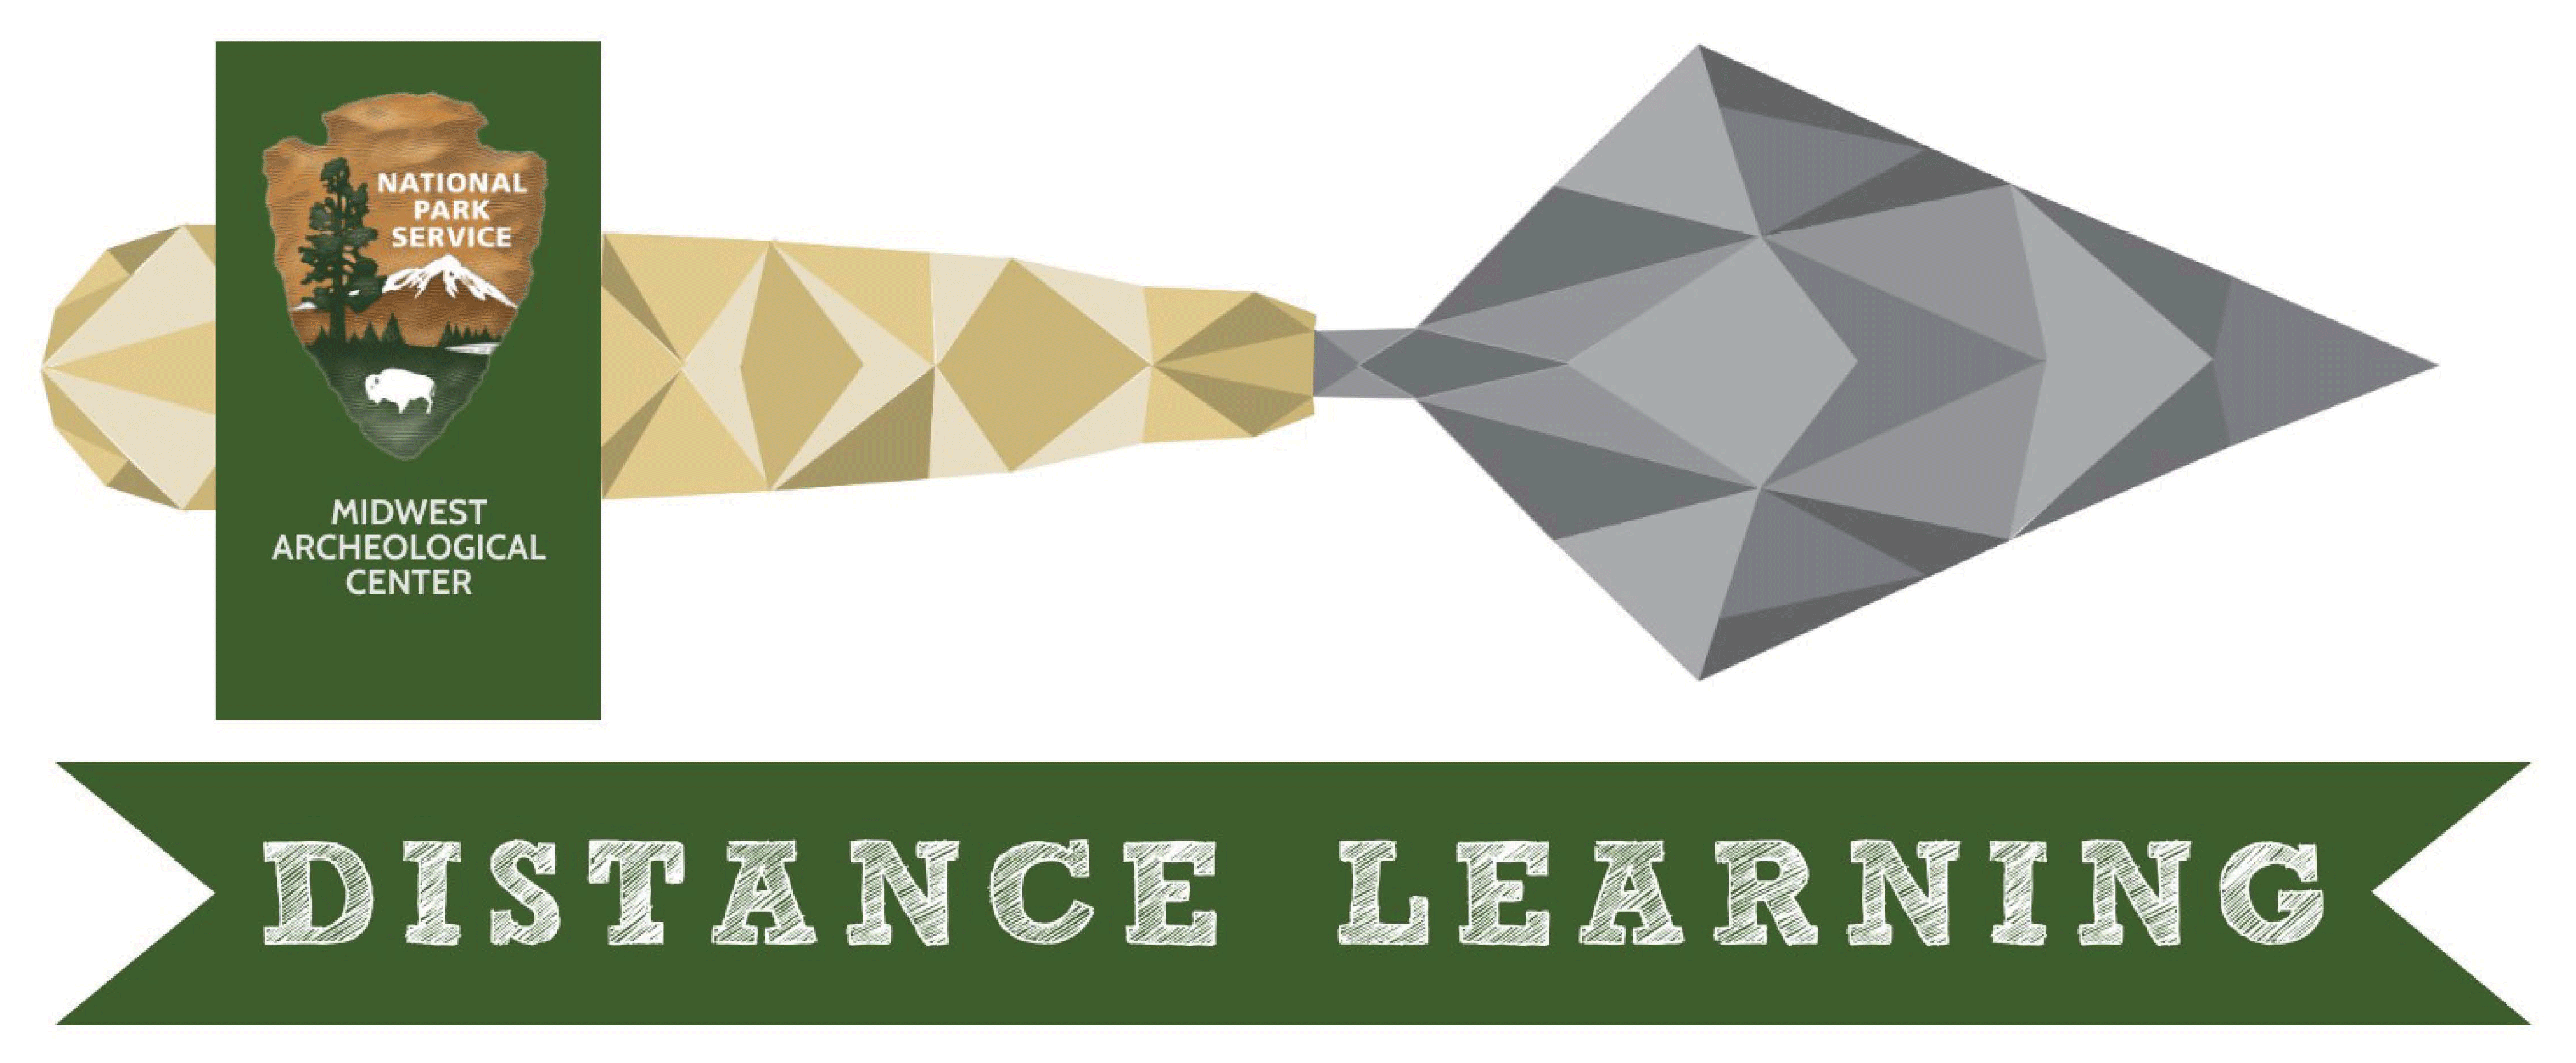 Header with the National Park Service arrowhead logo and "Midwest Archeological Center" in a green logo atop the handle of a geometric illustration of a trowel. Banner below trowel reads "DISTANCE LEARNING."